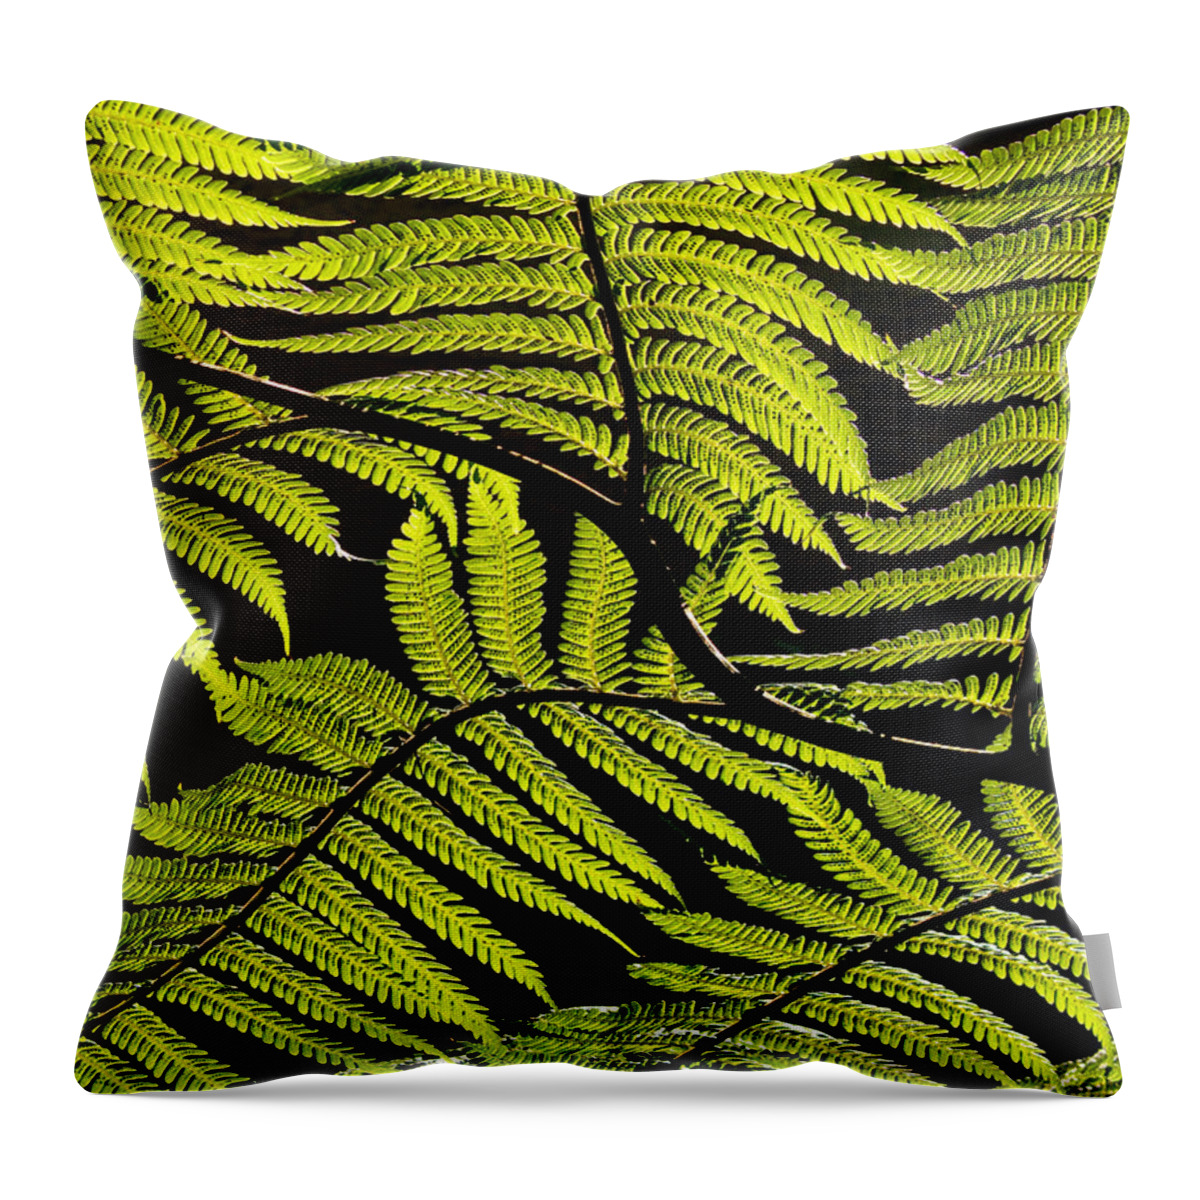 Fern Tree Throw Pillow featuring the photograph Bent Fern by Guillermo Rodriguez